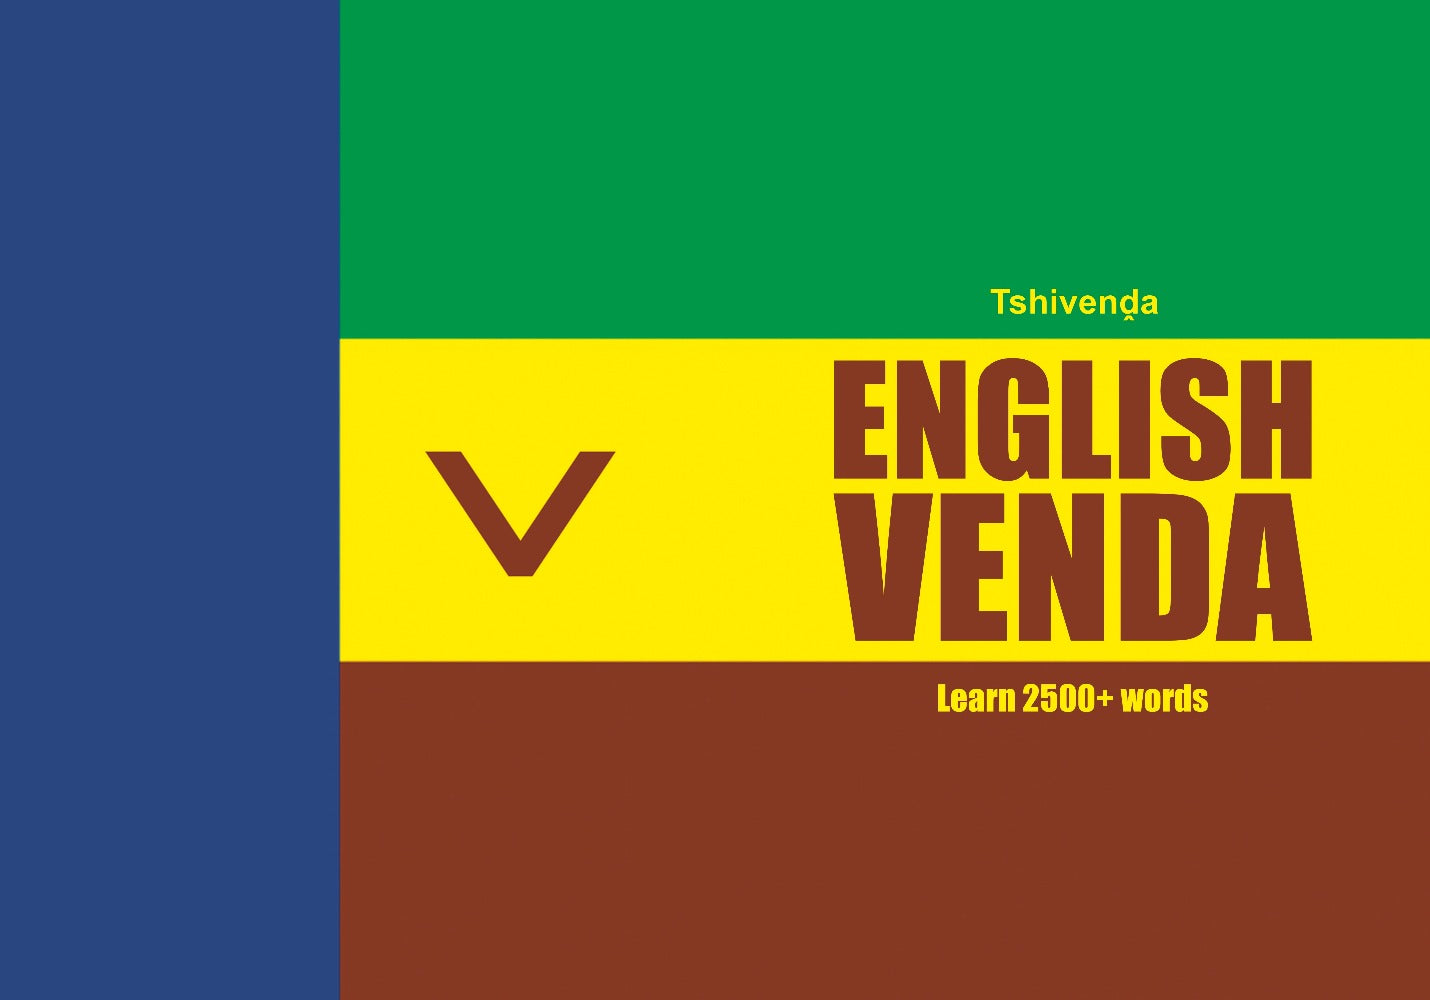 Venda language learning notebook cover